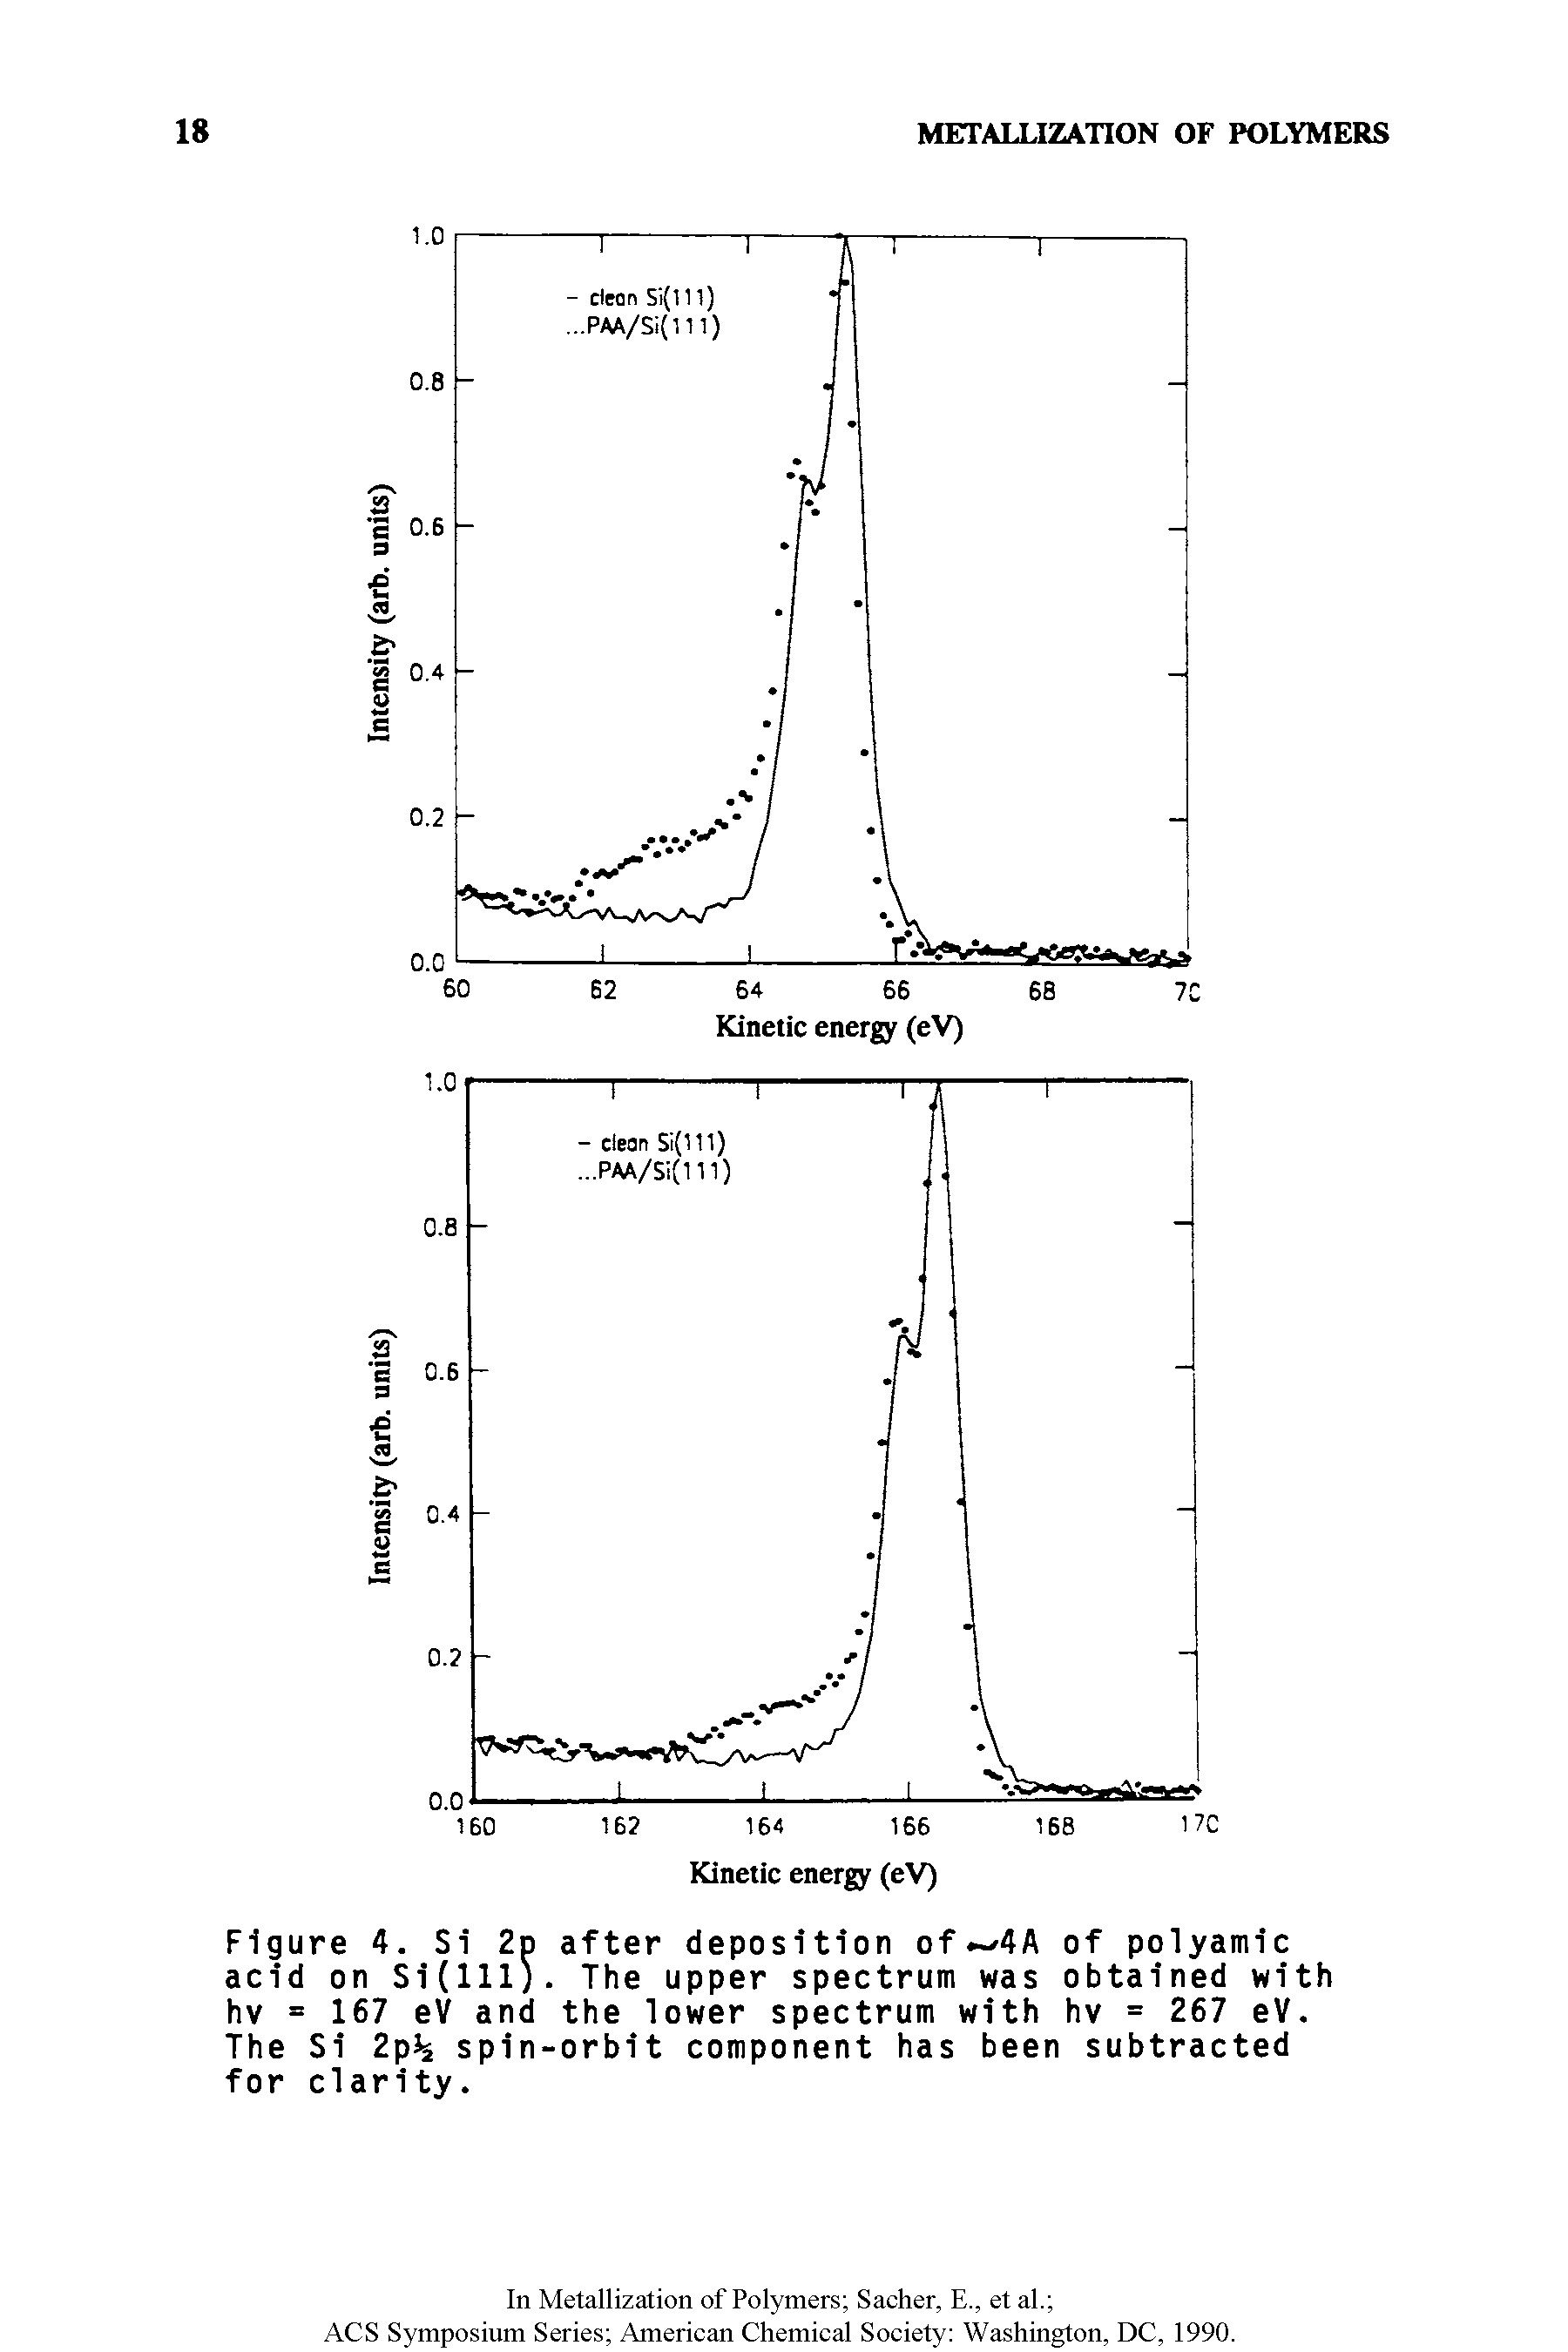 Figure 4. Si 2p after deposition of 4A of polyamic acid on Si(111). The upper spectrum was obtained with hv = 167 eV and the lower spectrum with hv = 267 eV. The Si 2p% spin-orbit component has been subtracted for clarity.